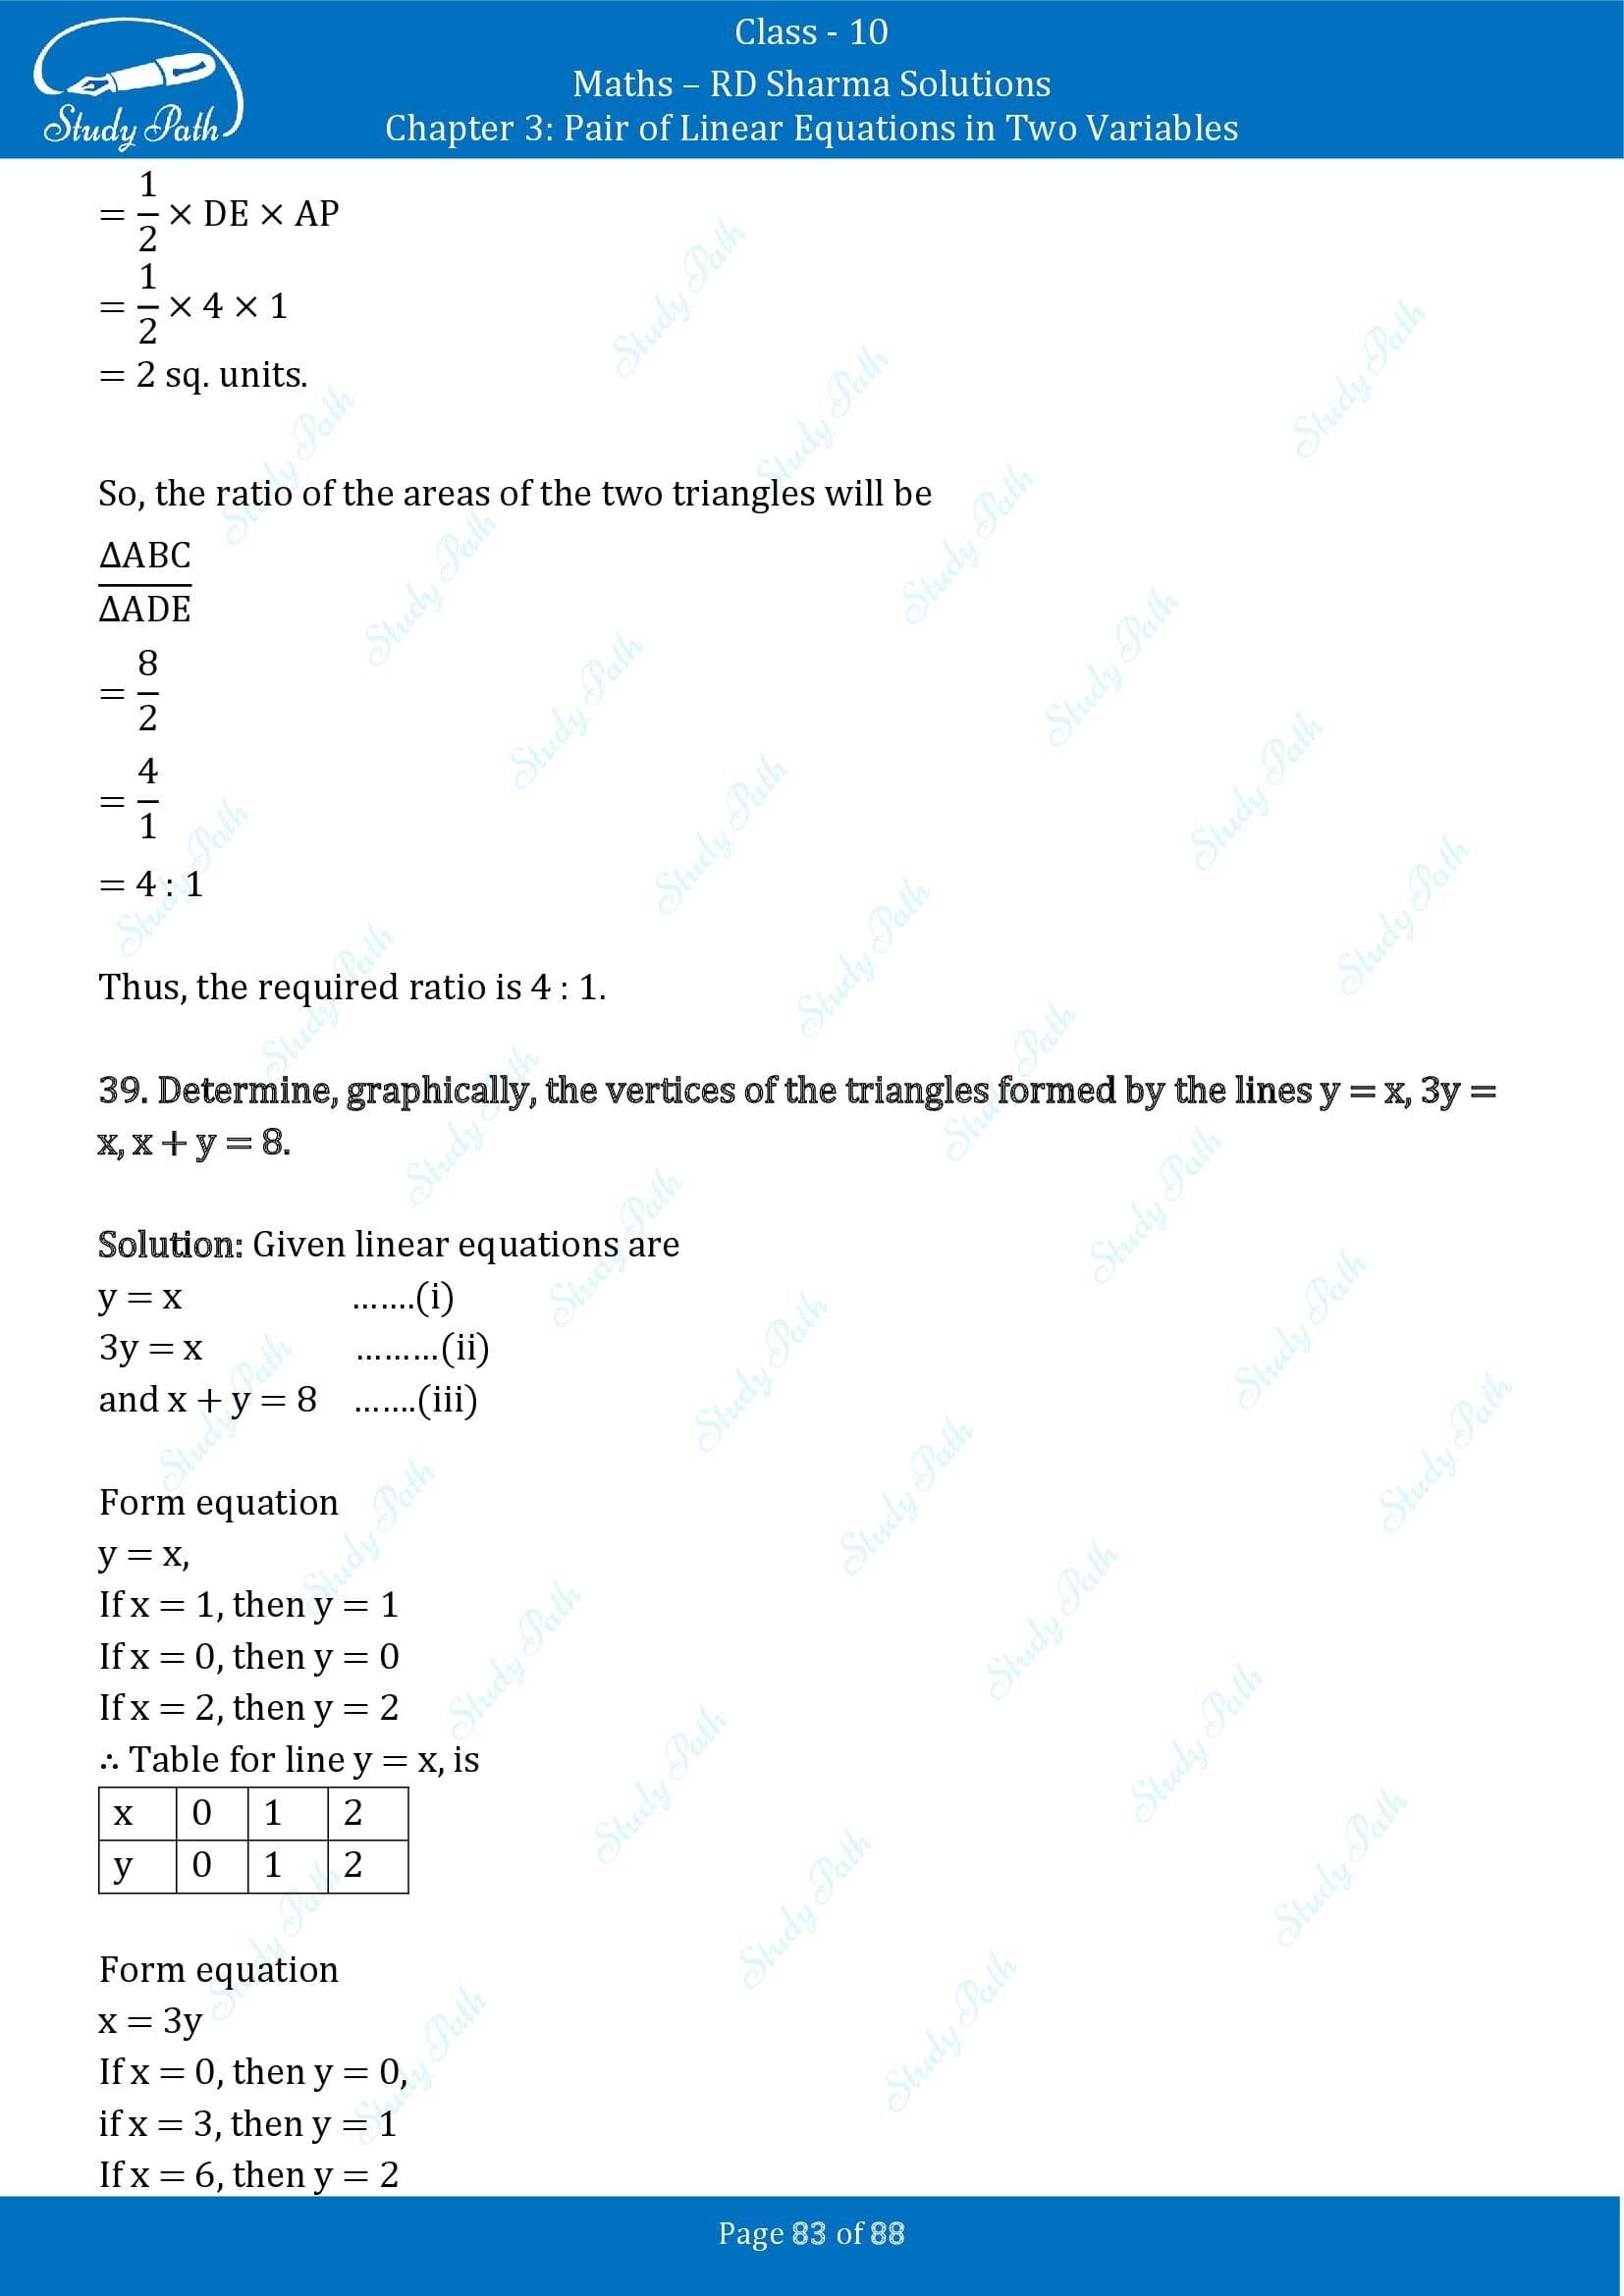 RD Sharma Solutions Class 10 Chapter 3 Pair of Linear Equations in Two Variables Exercise 3.2 00083